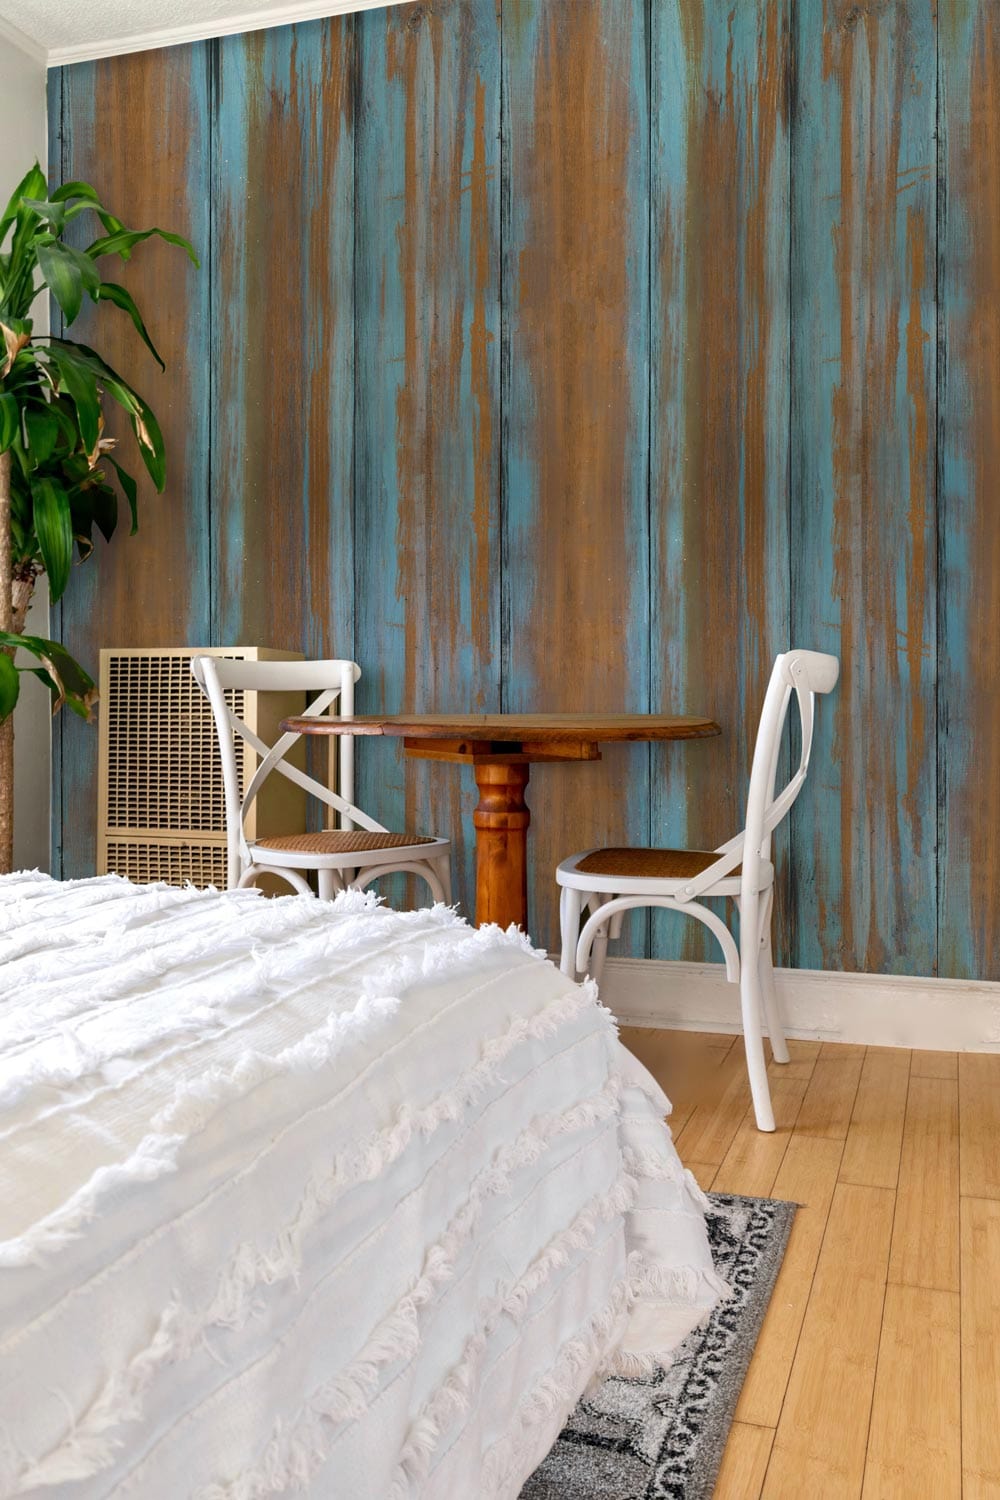 wood effect wall murals in blue and orange for a bedroom with a vertical texture and wood grain